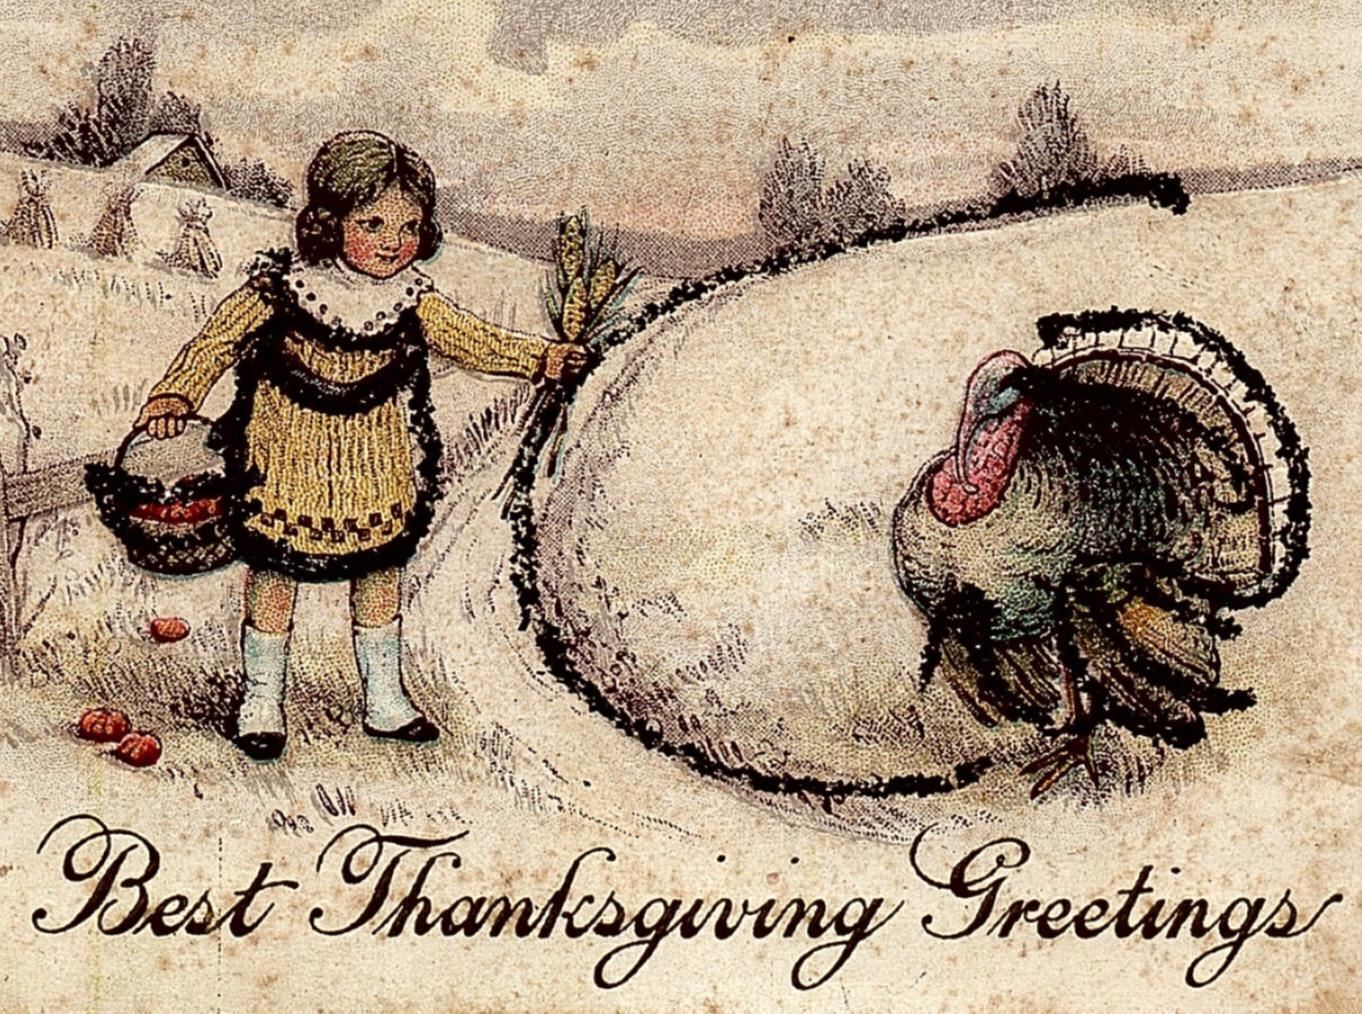 c1910 THANKSGIVING GREETINGS TURKEY YOUNG GIRL TINSELED EMBOSSED POSTCARD 34-62